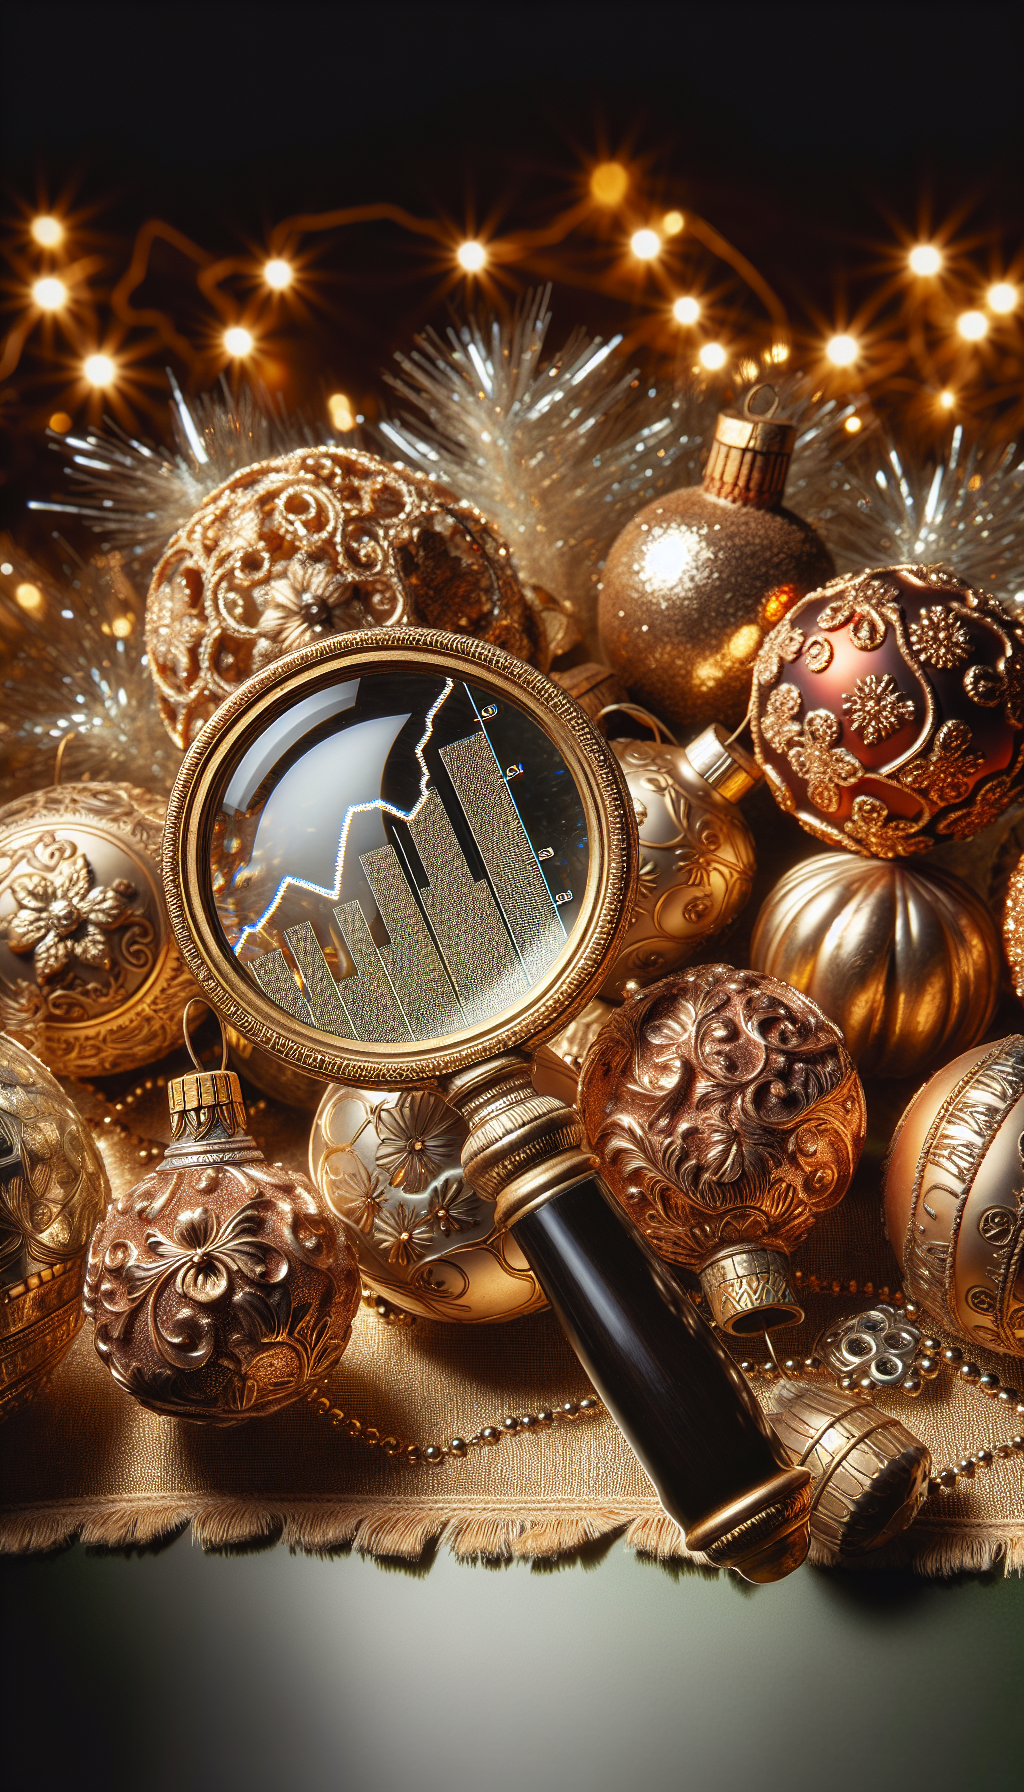 An elegantly aged, golden magnifying glass peers over a shimmering array of classic Christmas ornaments, their intricate, vintage details glowing amidst a backdrop of festive tinsel. The magnifying lens cleverly focuses on a price tag tied to an ornate, filigree bauble, with the reflection revealing an ascending graph symbolizing the rising value of such timeless treasures.